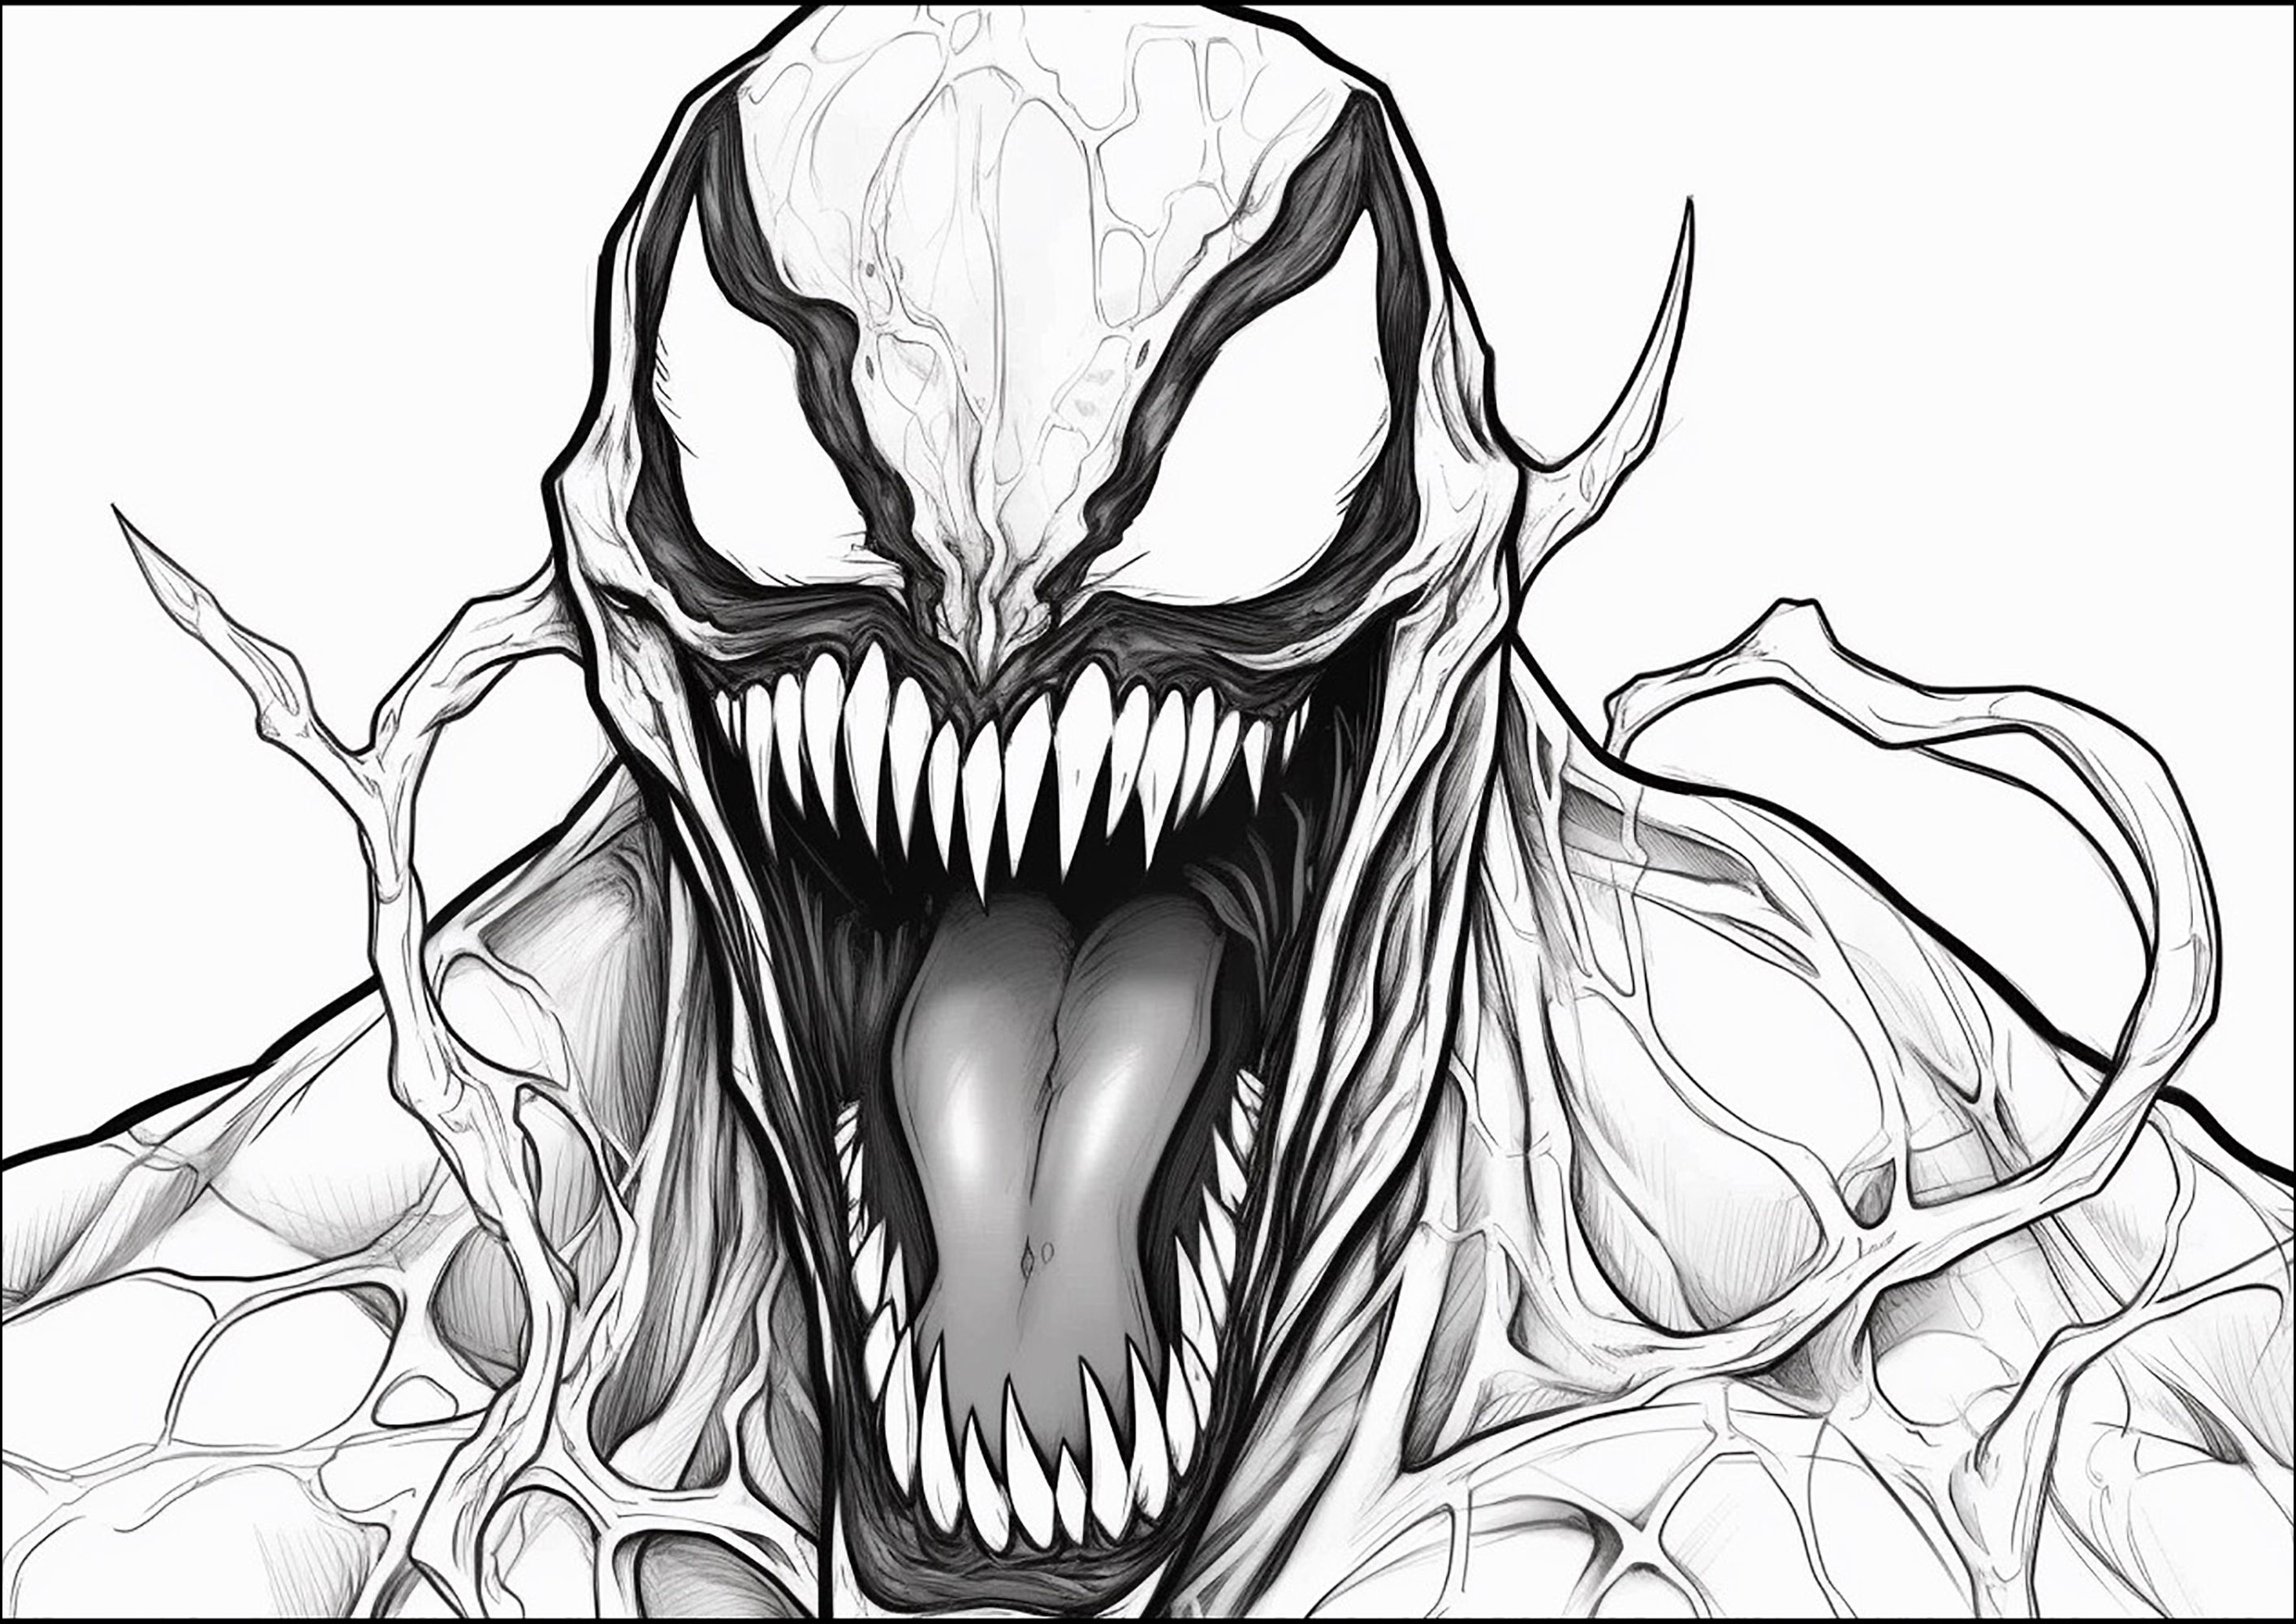 Horrible Venom coloring. He's really scary